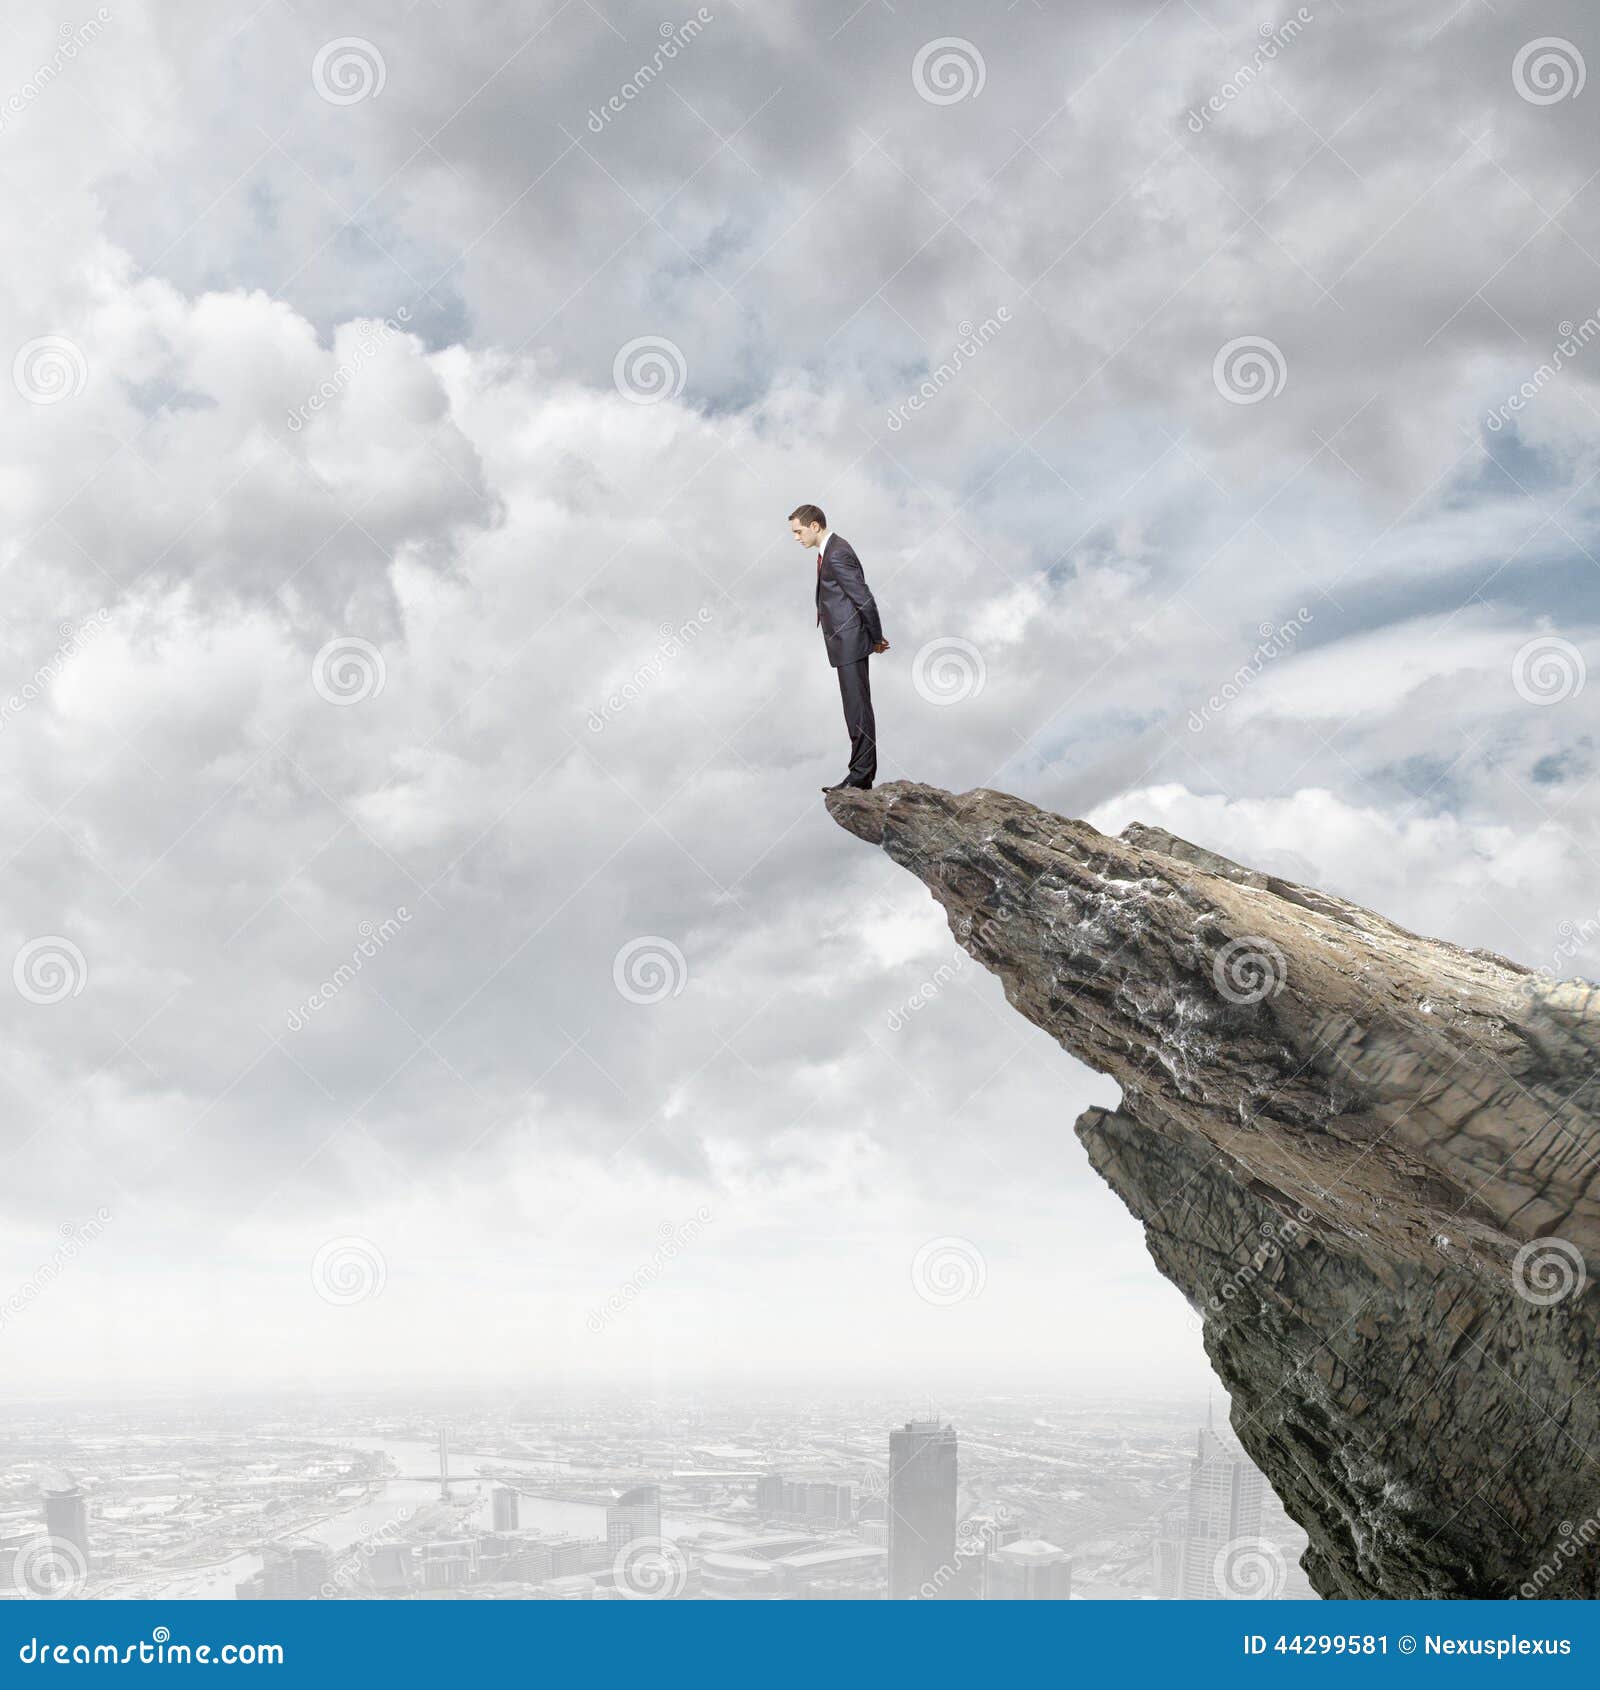 Man On The Edge Of A Cliff Stock Photo - Download Image Now